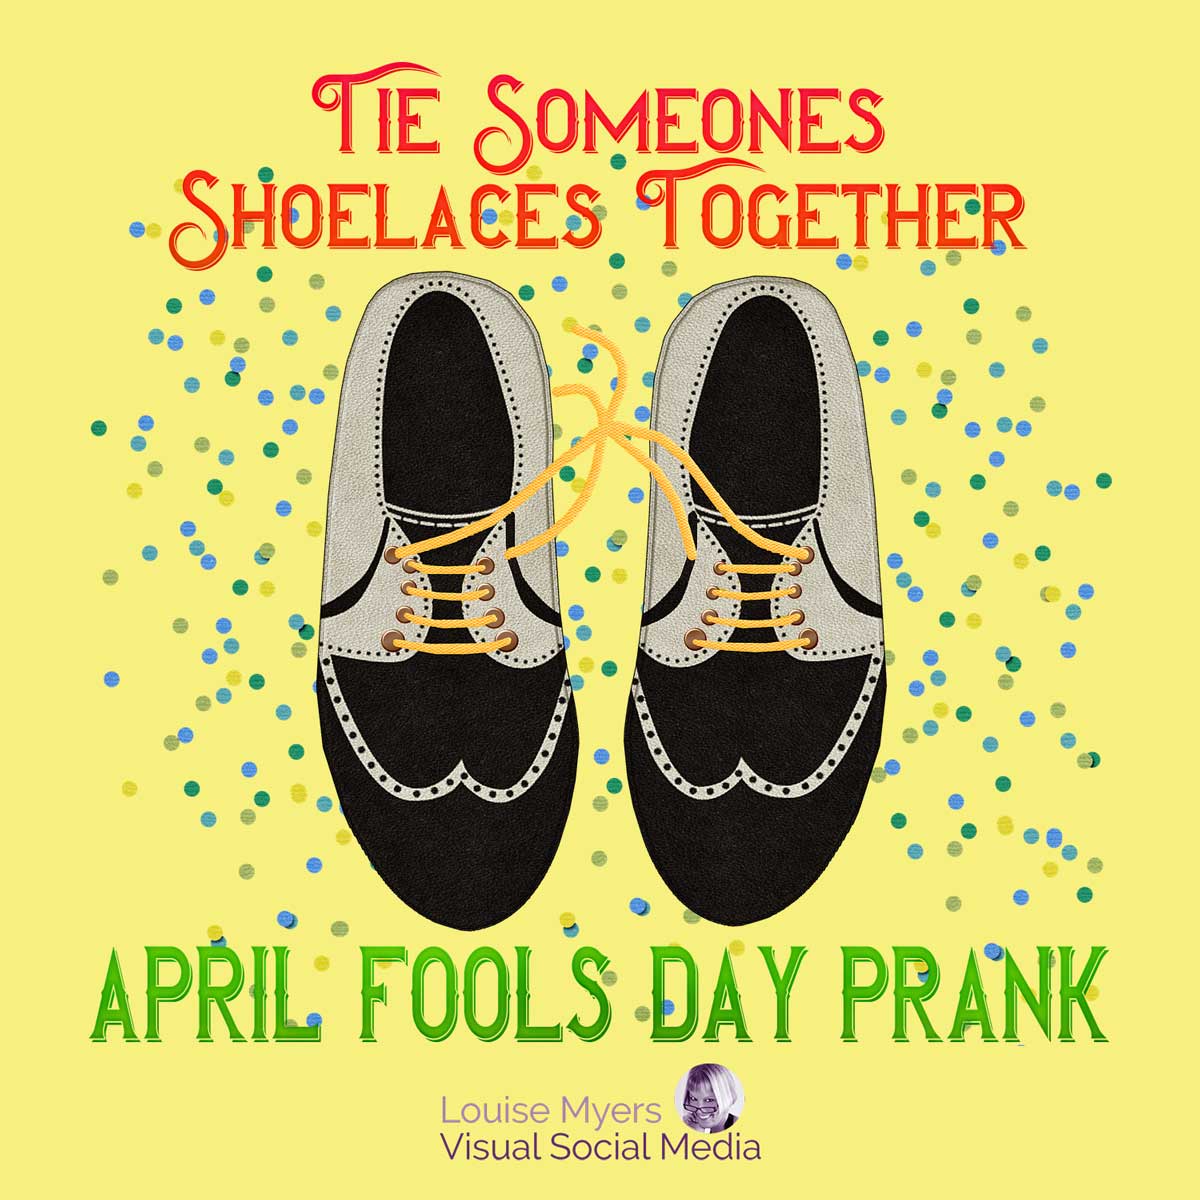 lace up shoes tied together says April Fool’s Day prank idea.